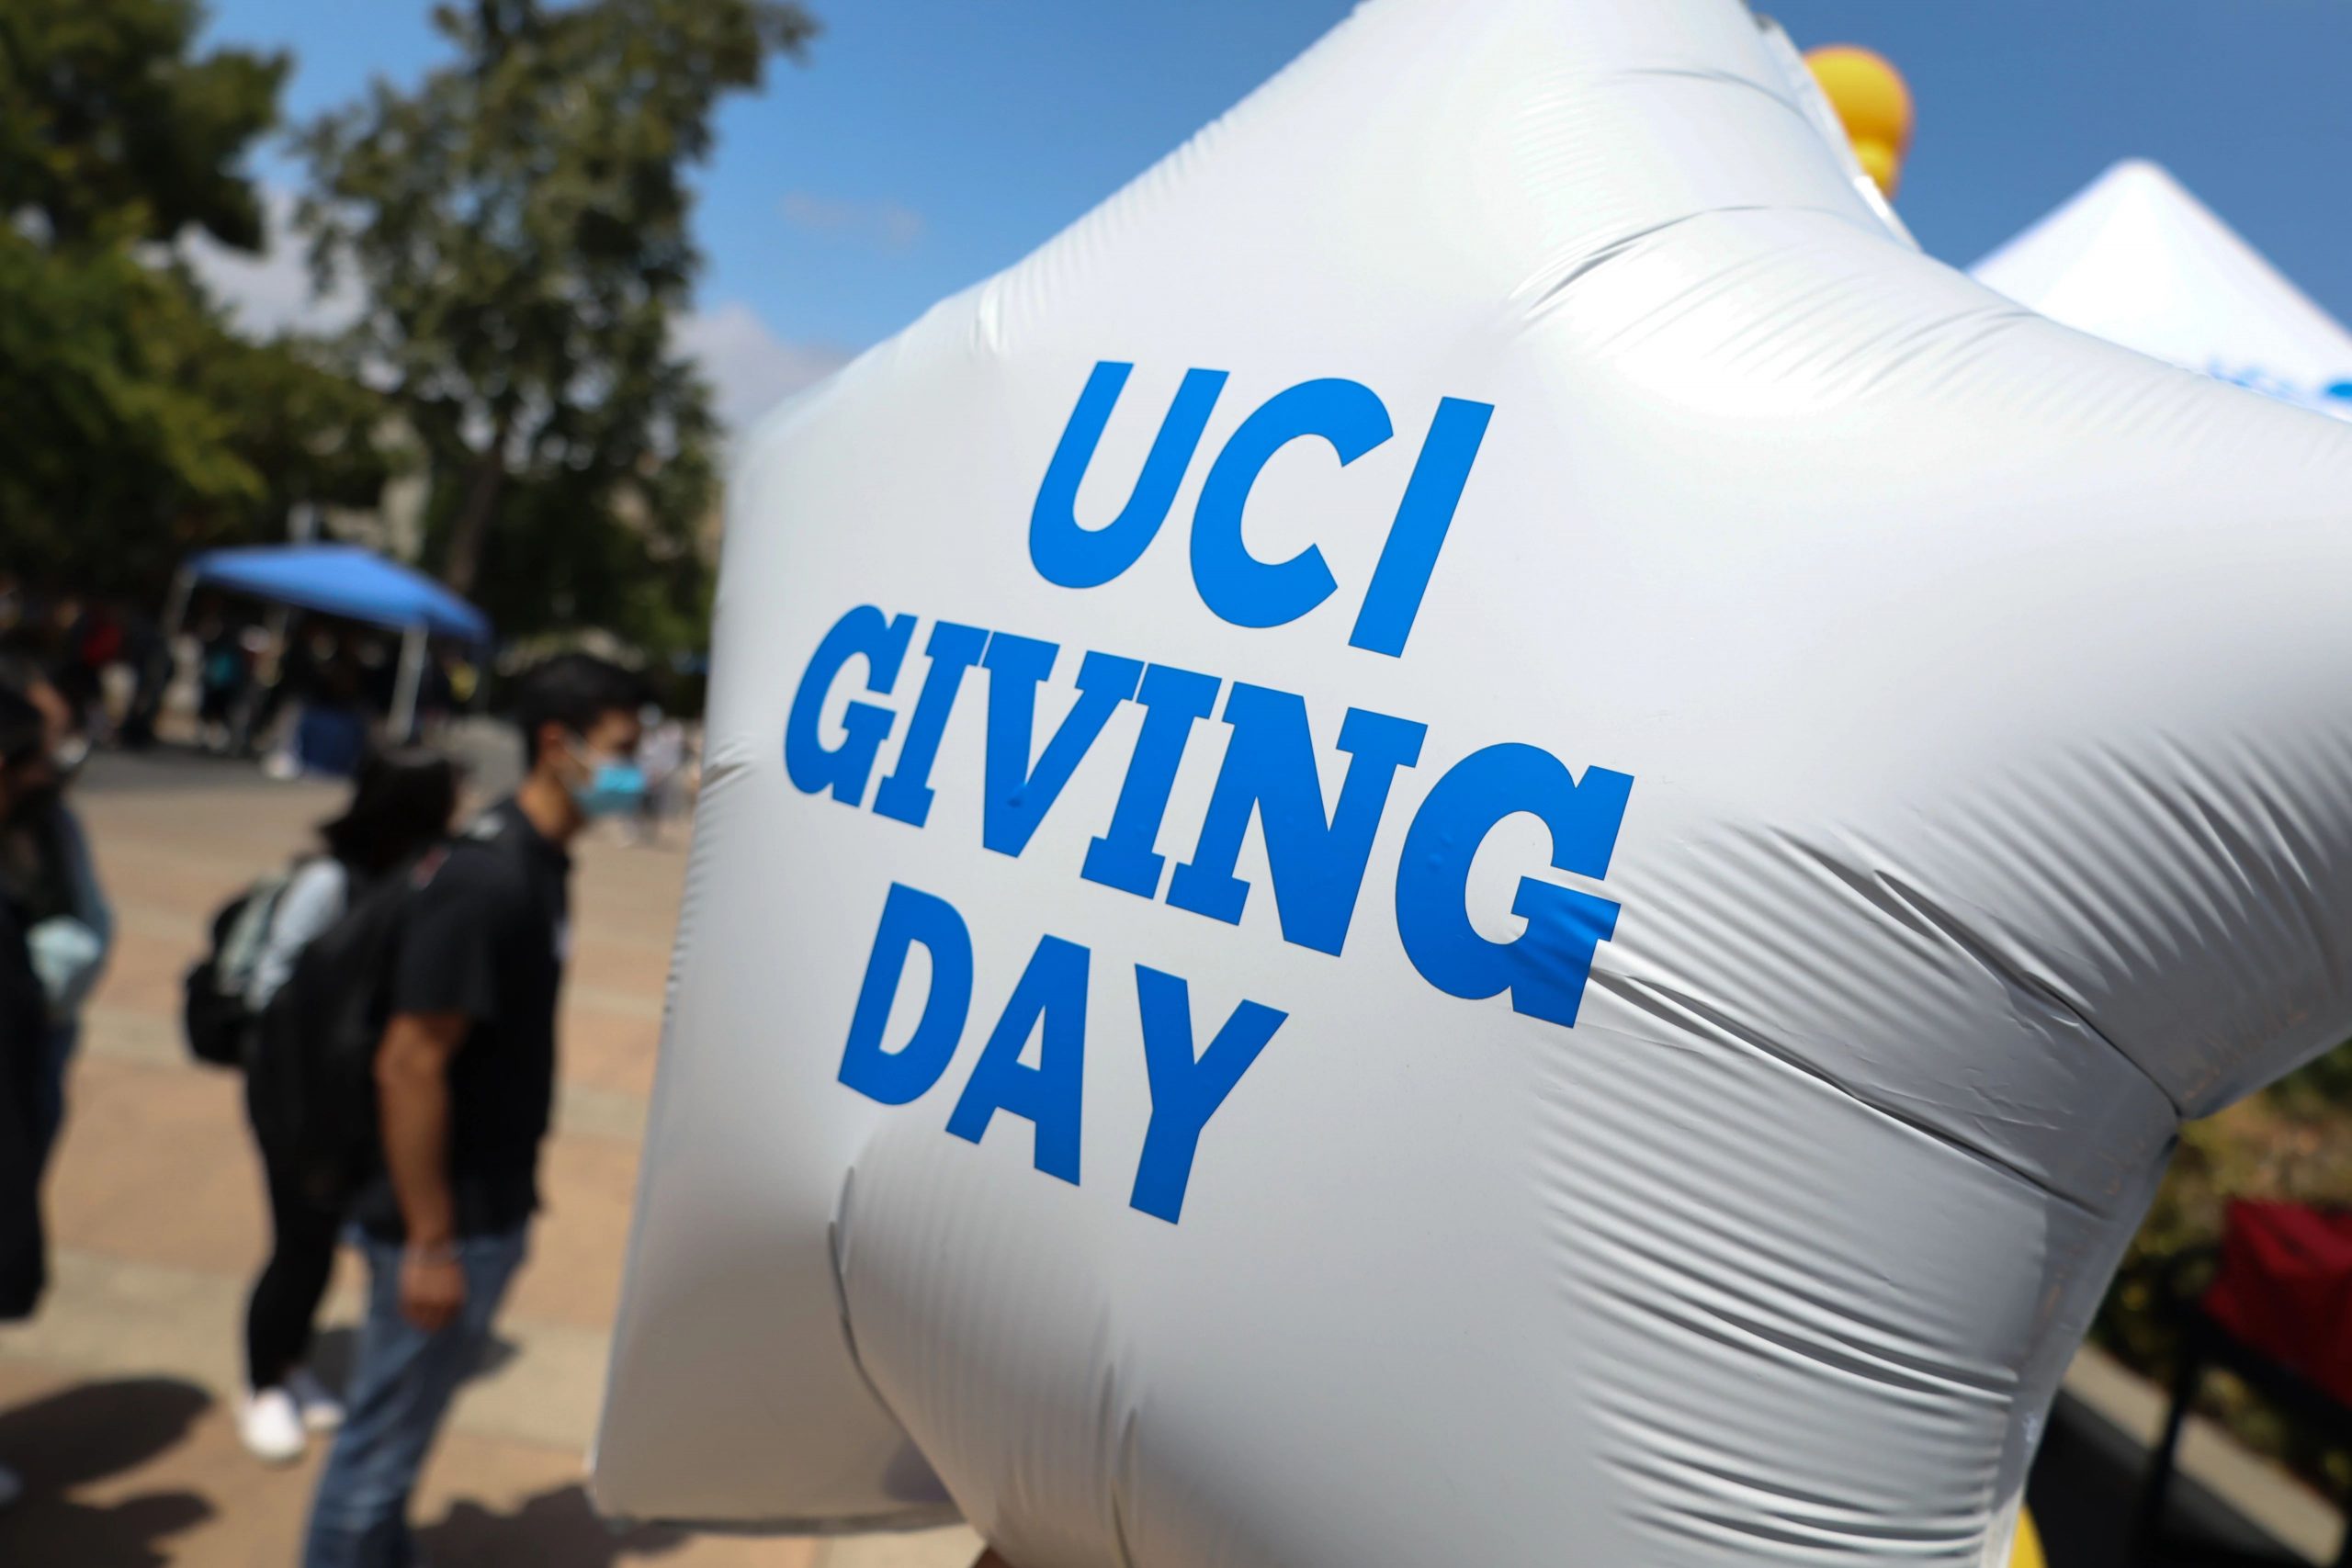 UCI Giving Day